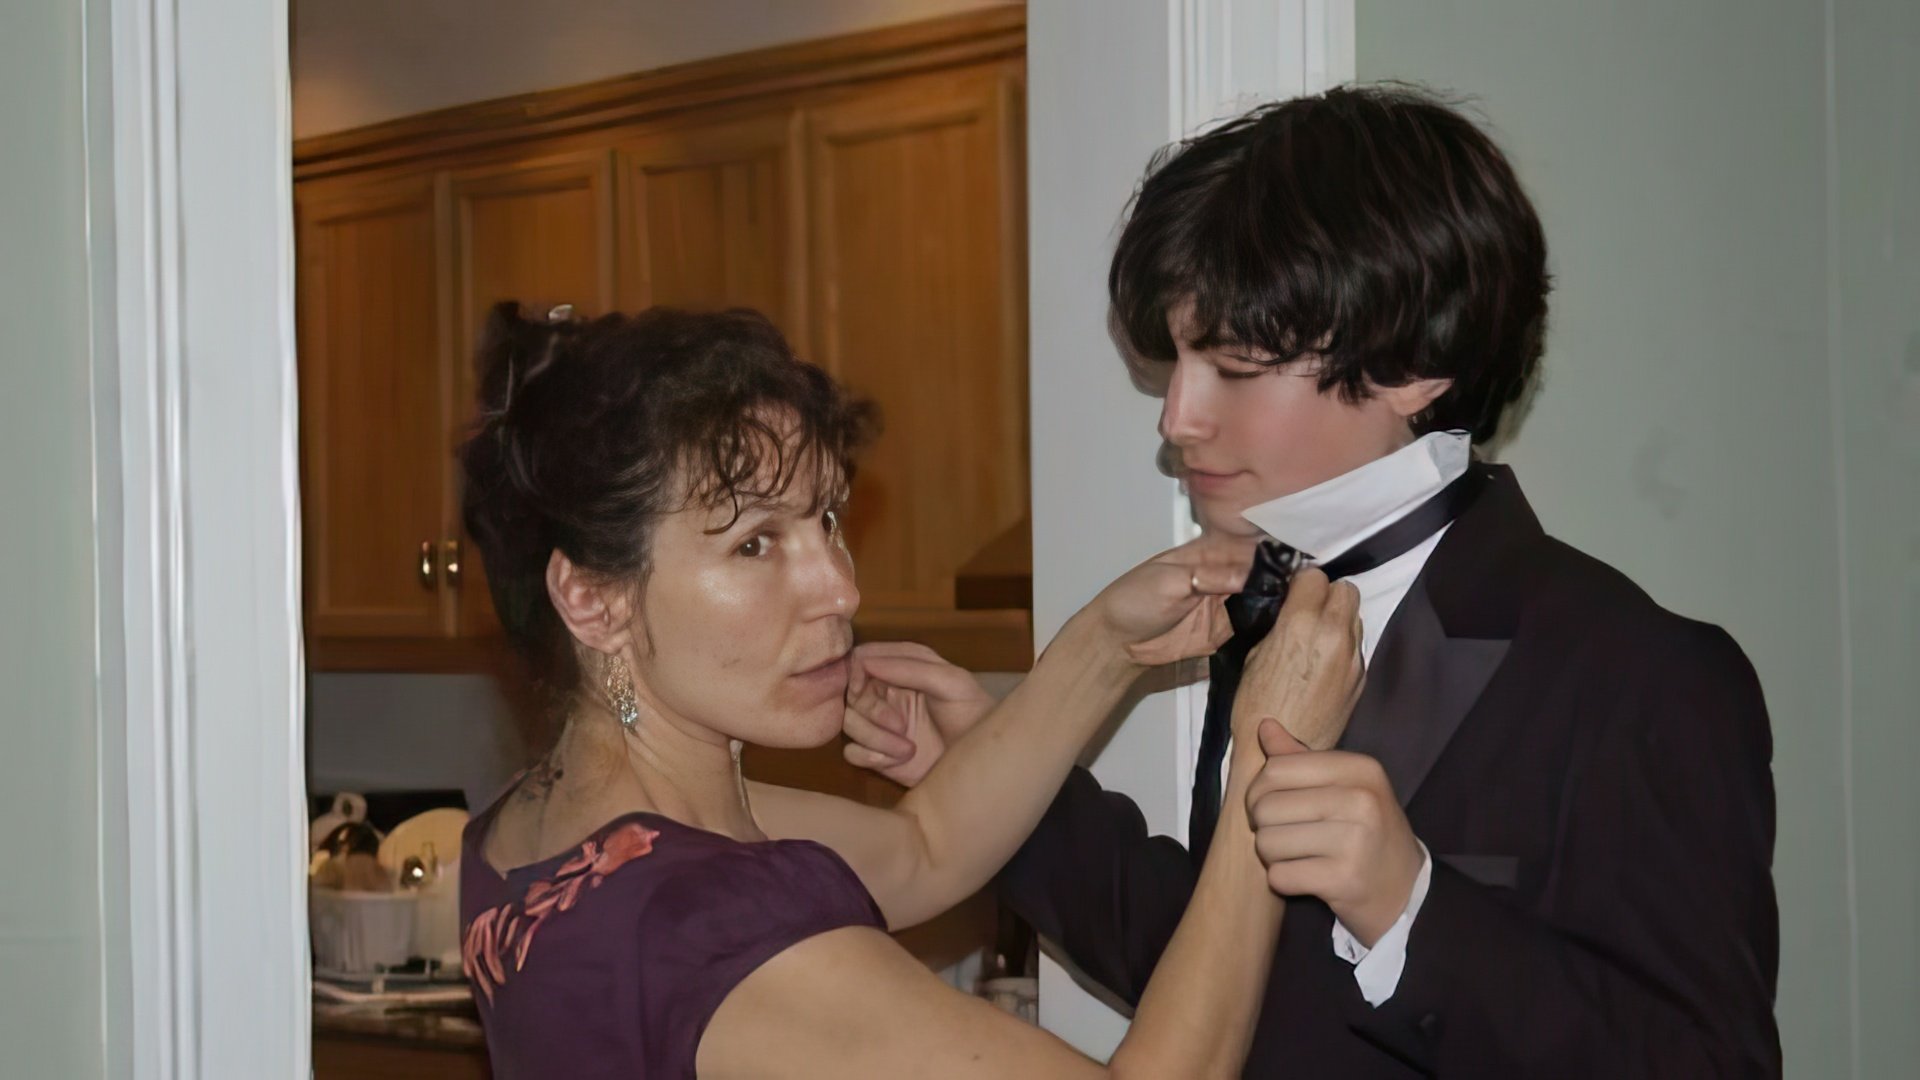 The photo shows young Ezra Miller and his mother